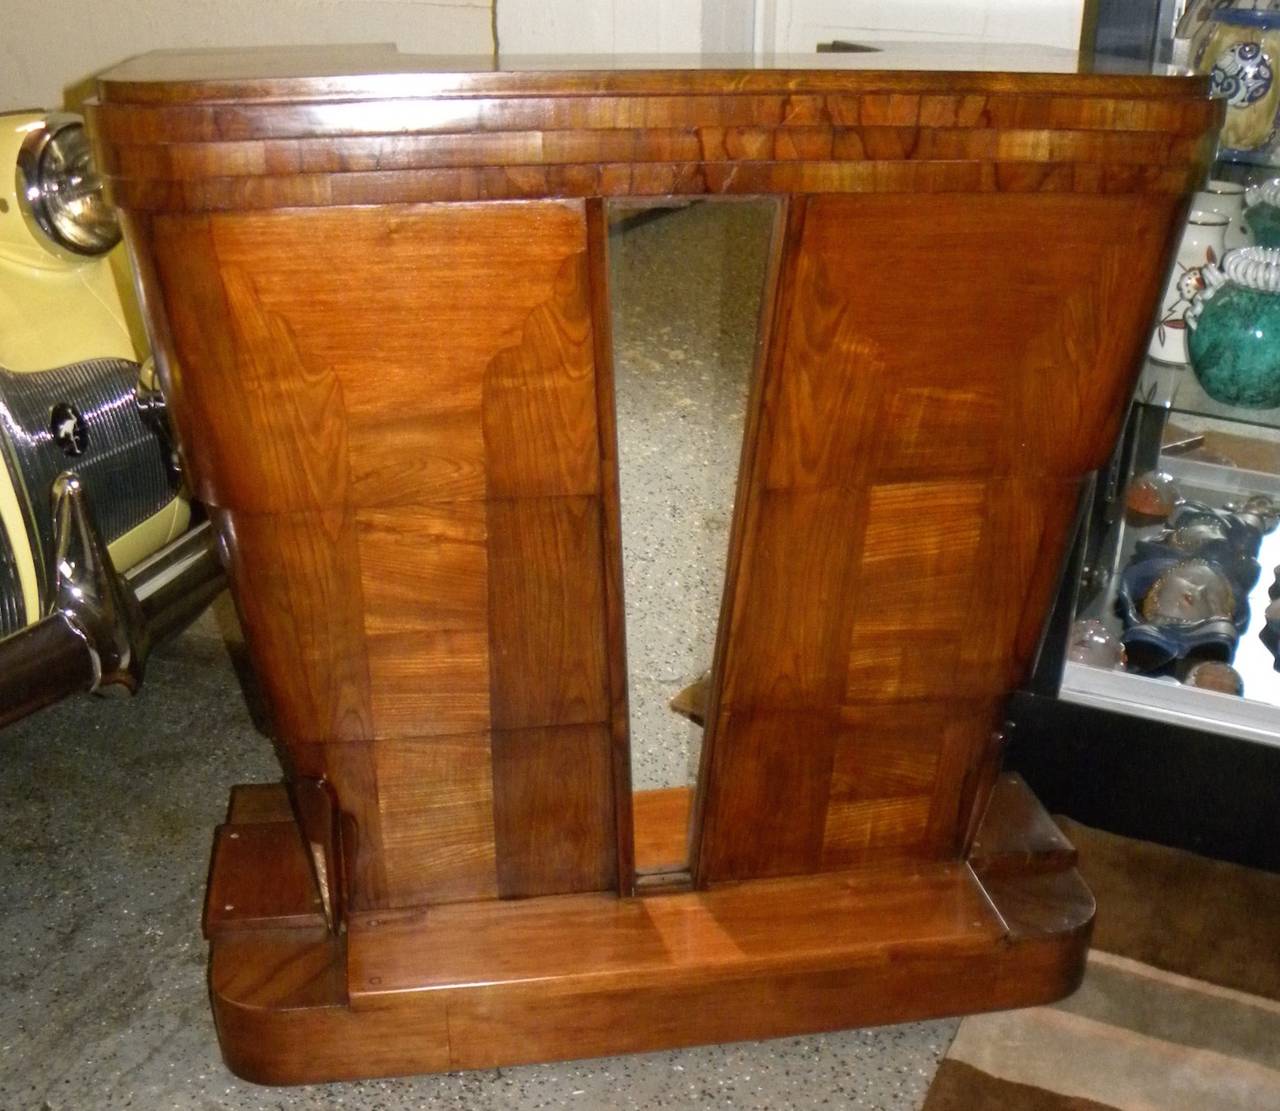 Stand behind bar, lectern, reception desk, Art Deco styling.
 
This original late 1930s bar is a newly restored gem. The rich use of woods with interesting grain arranged in patterns, the stacked wood top and a touch of mirrored trim are two